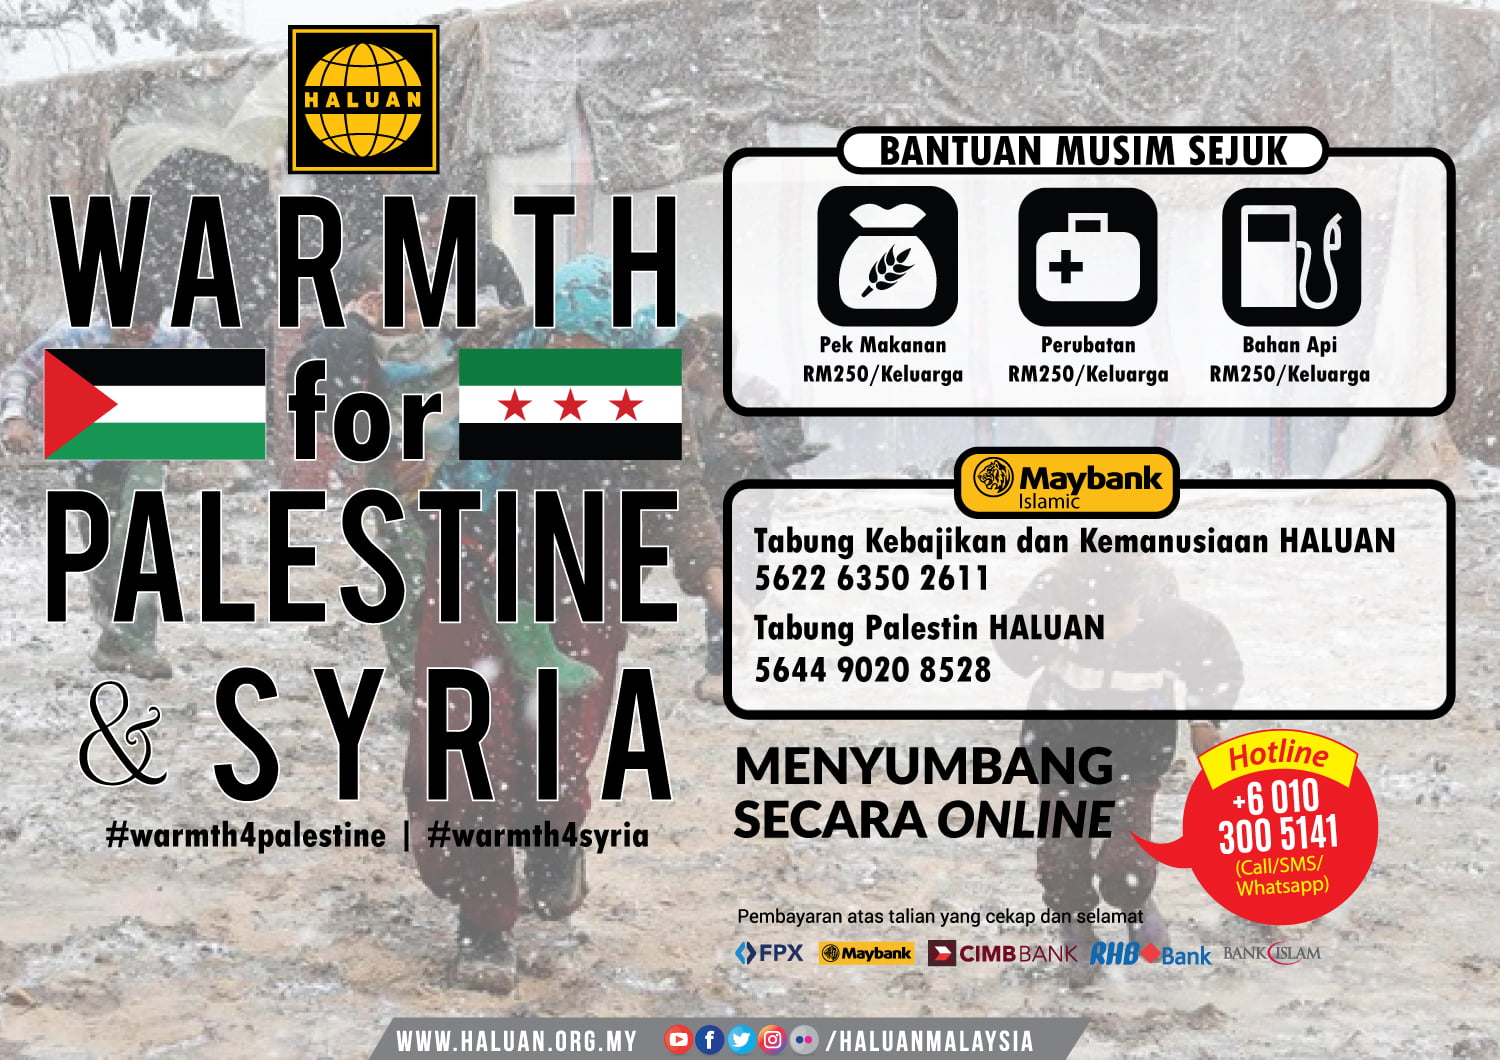 Warmth for Palestine & Syria